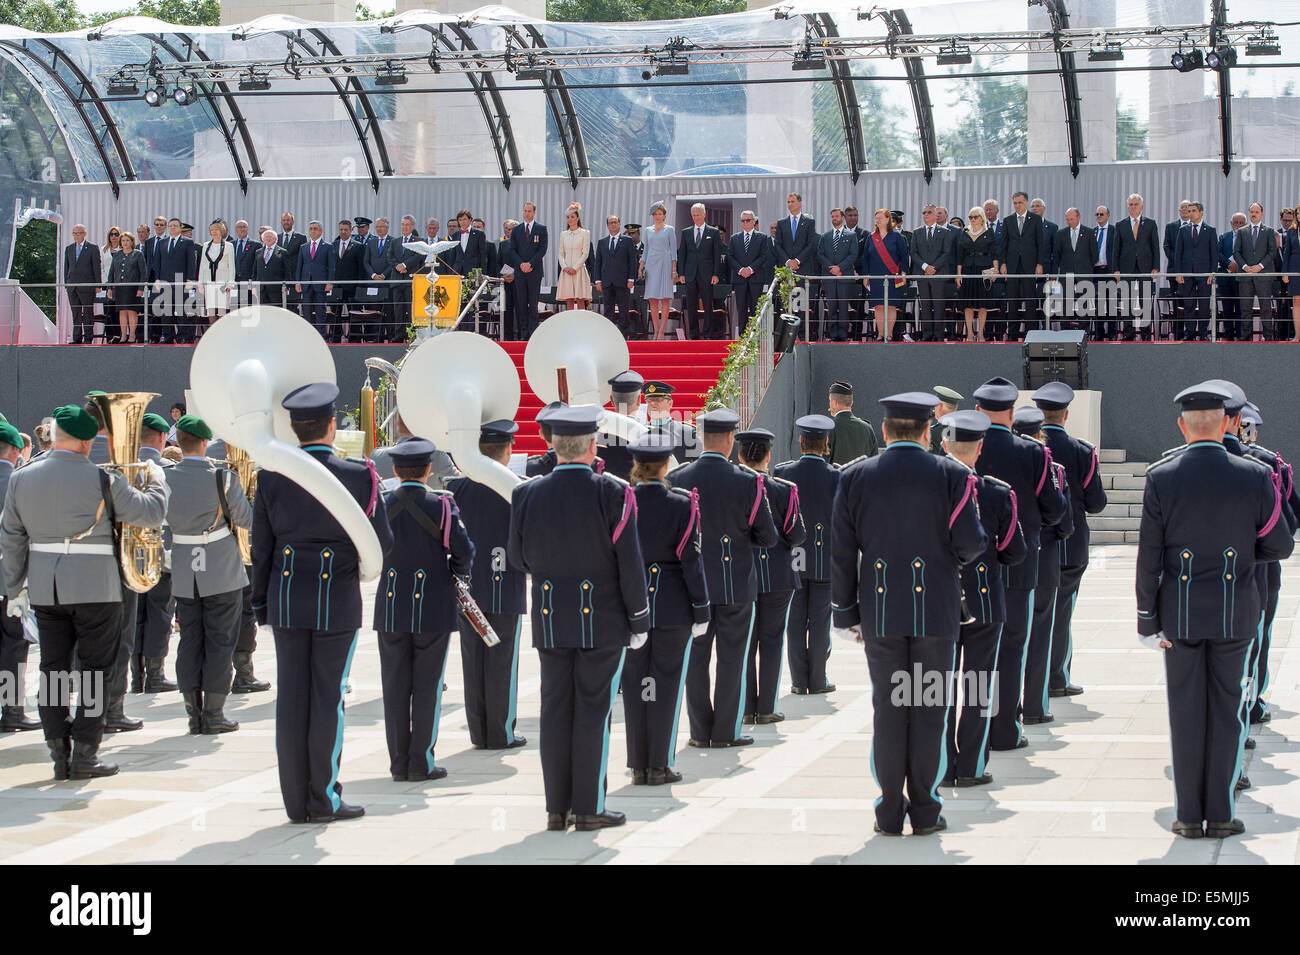 Liege, Belgium. 04th Aug, 2014. Guests of honor attend music parade of the international memorial ceremony for the 100th anniversary of the beginning of the First World War in Liege, Belgium, 04 August 2014. The year 2014 sees the 100th anniversary of the beginning of WWI, or the Great War, which according to official statistics cost more than 37 million military and civilian casualties between 1914 and 1918. Photo: Maurizio Gambarini/dpa/Alamy Live News Stock Photo